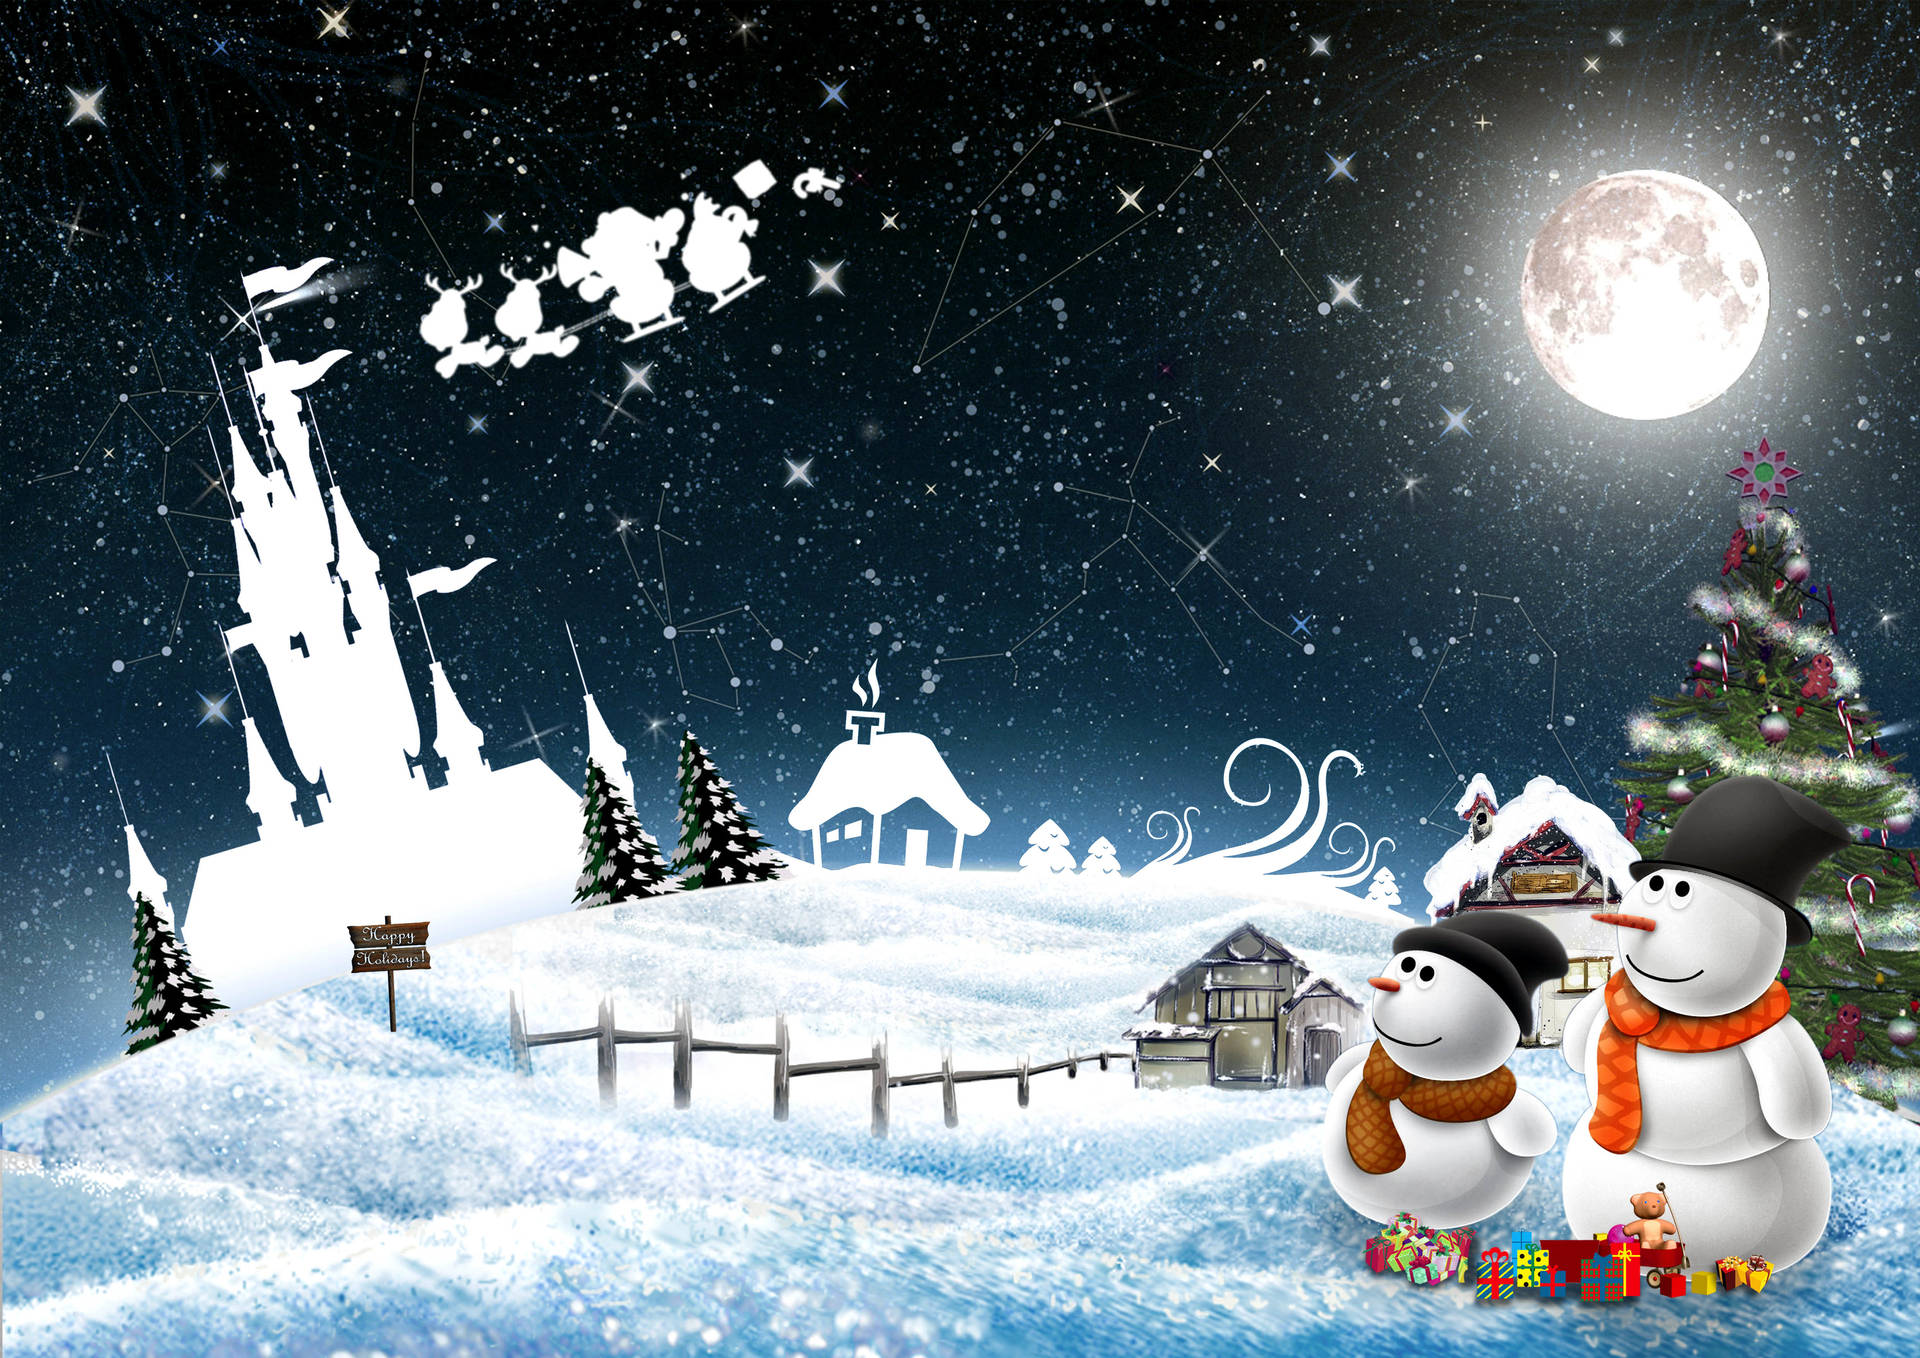 New Year's Snowman, Castle And Santa Claus